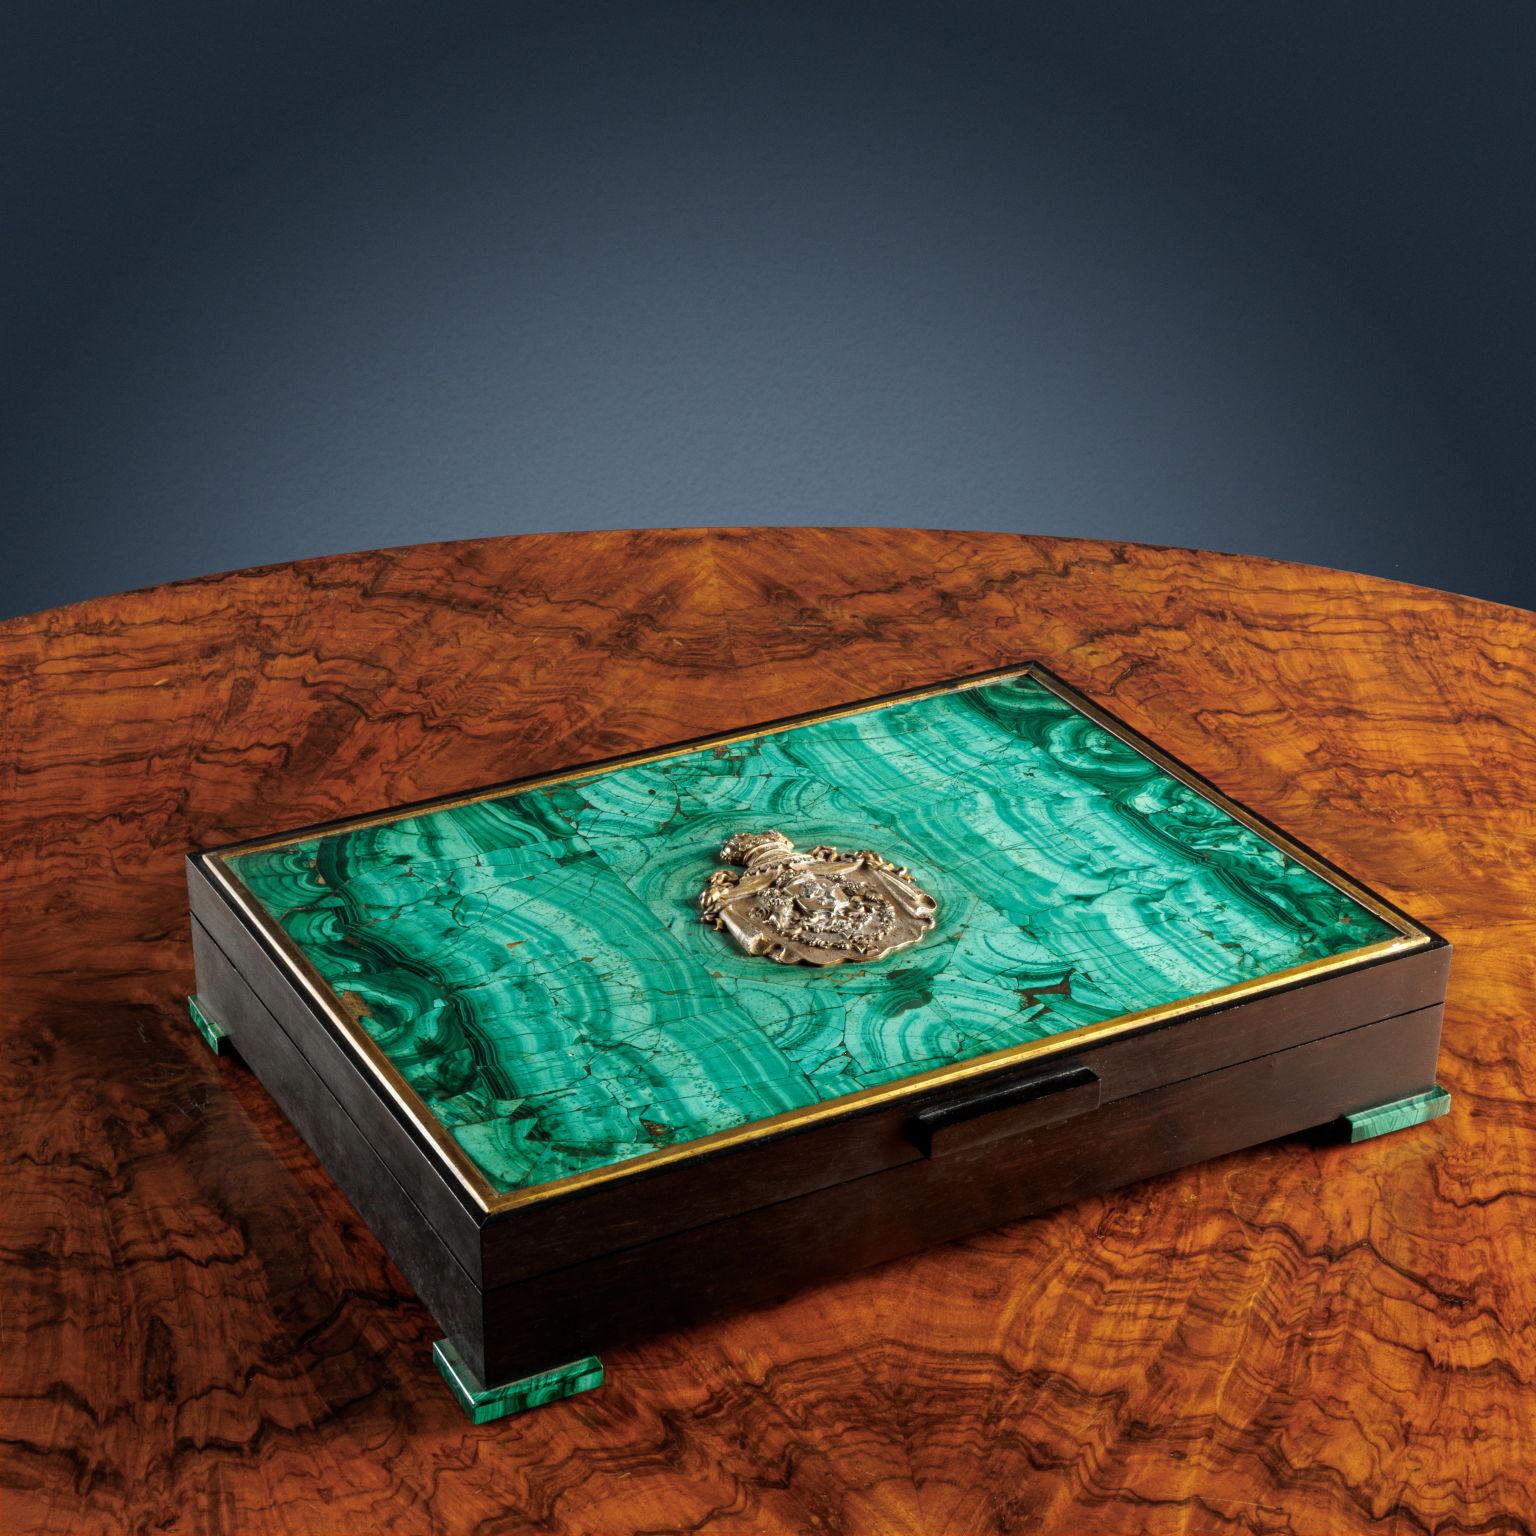 Document box made of ebony veneered wood, the top contains a malachite plate with brass border with central emblem, malachite veneered feet. The plaque in the center is in embossed and gilded sheet metal. Heraldry represents a curtain surmounted by